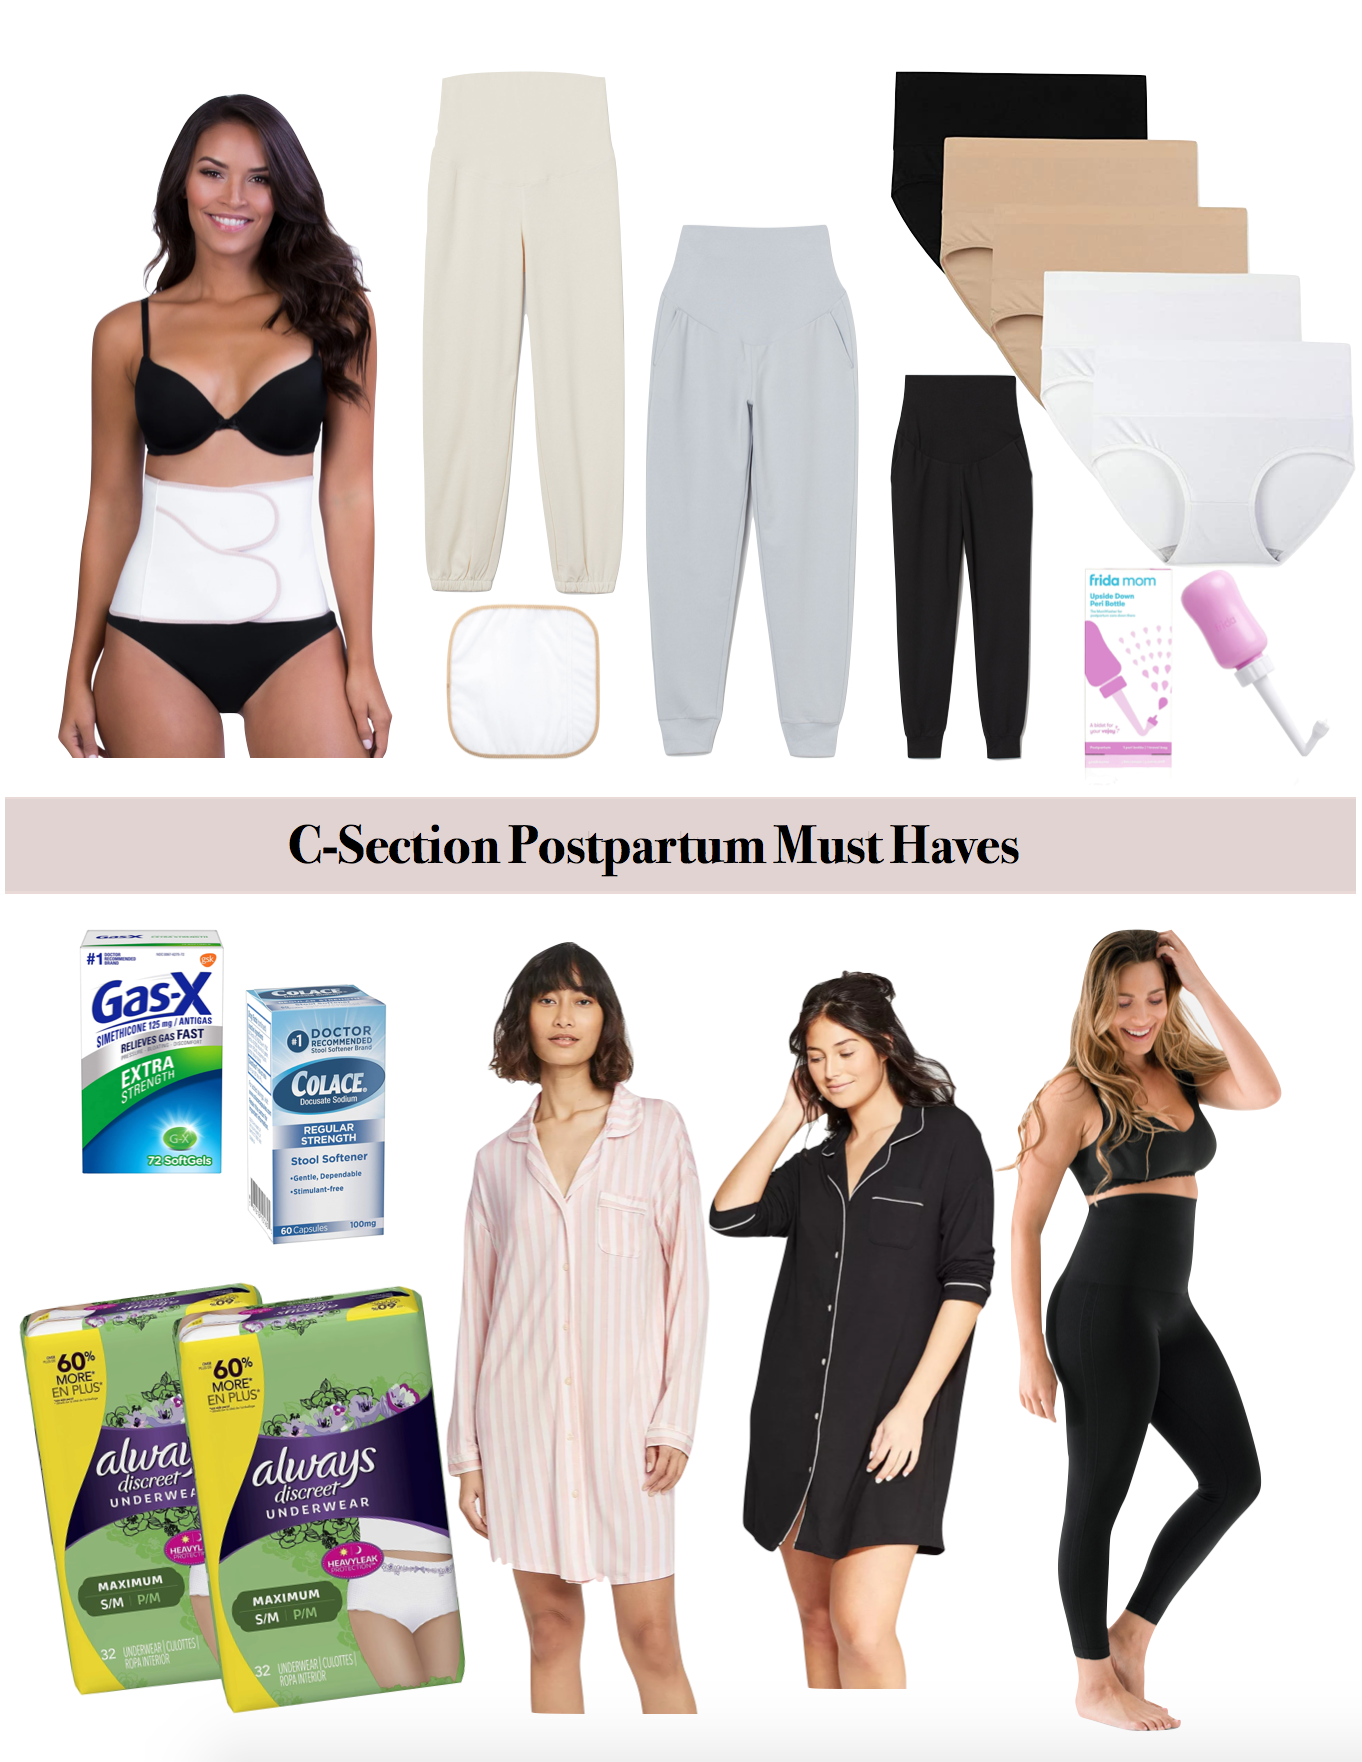 C-Section Postpartum Must Haves